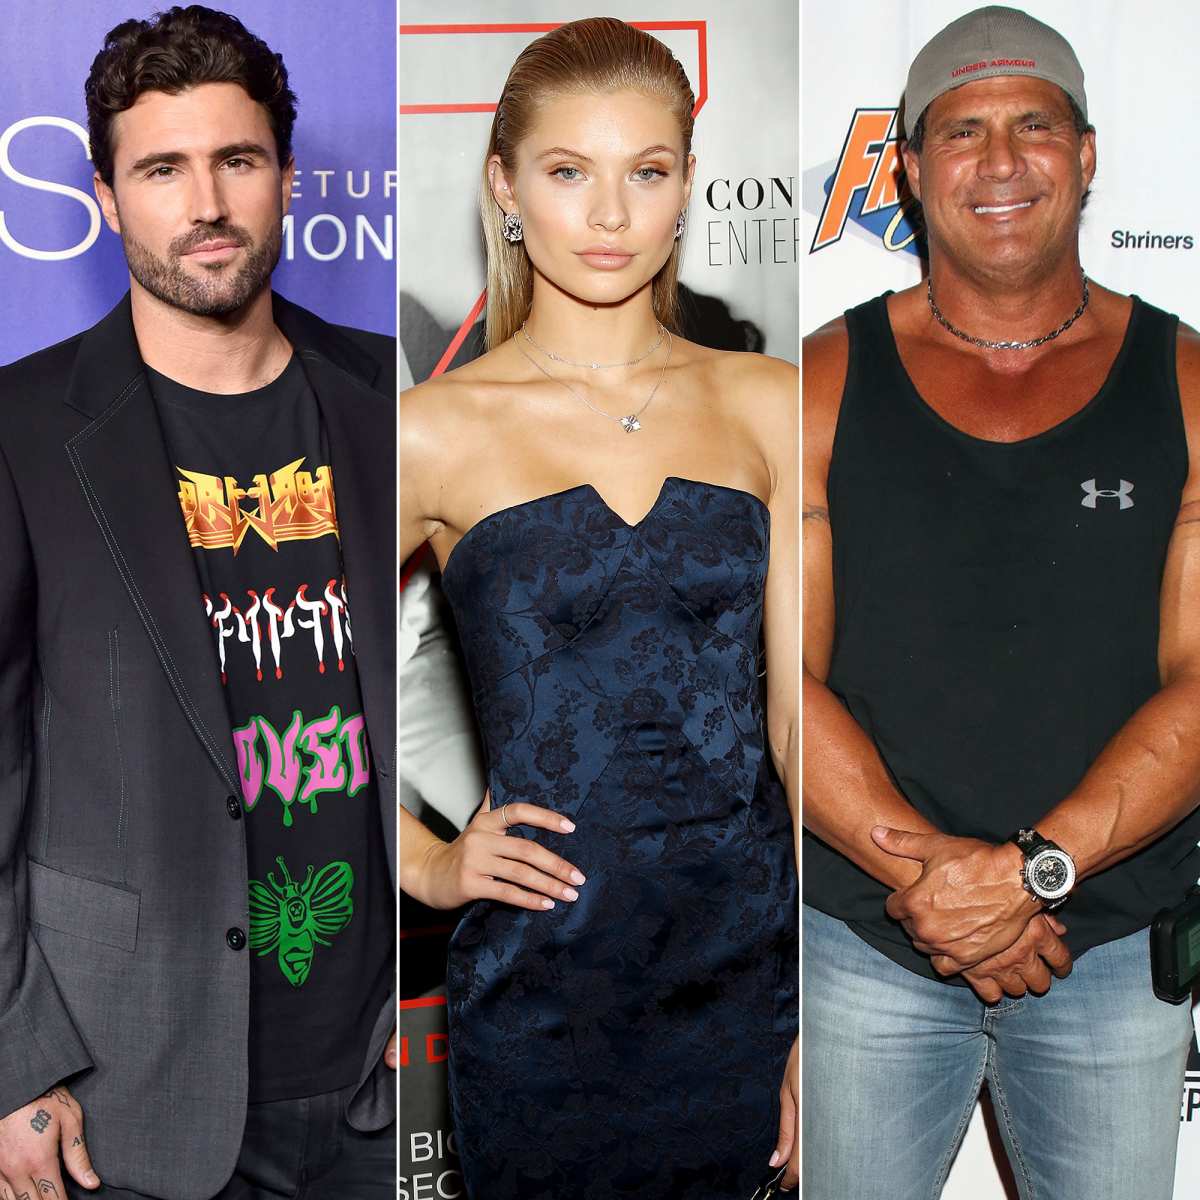 Brody Jenner Wants to Meet Josie Canseco's Dad Jose Canseco